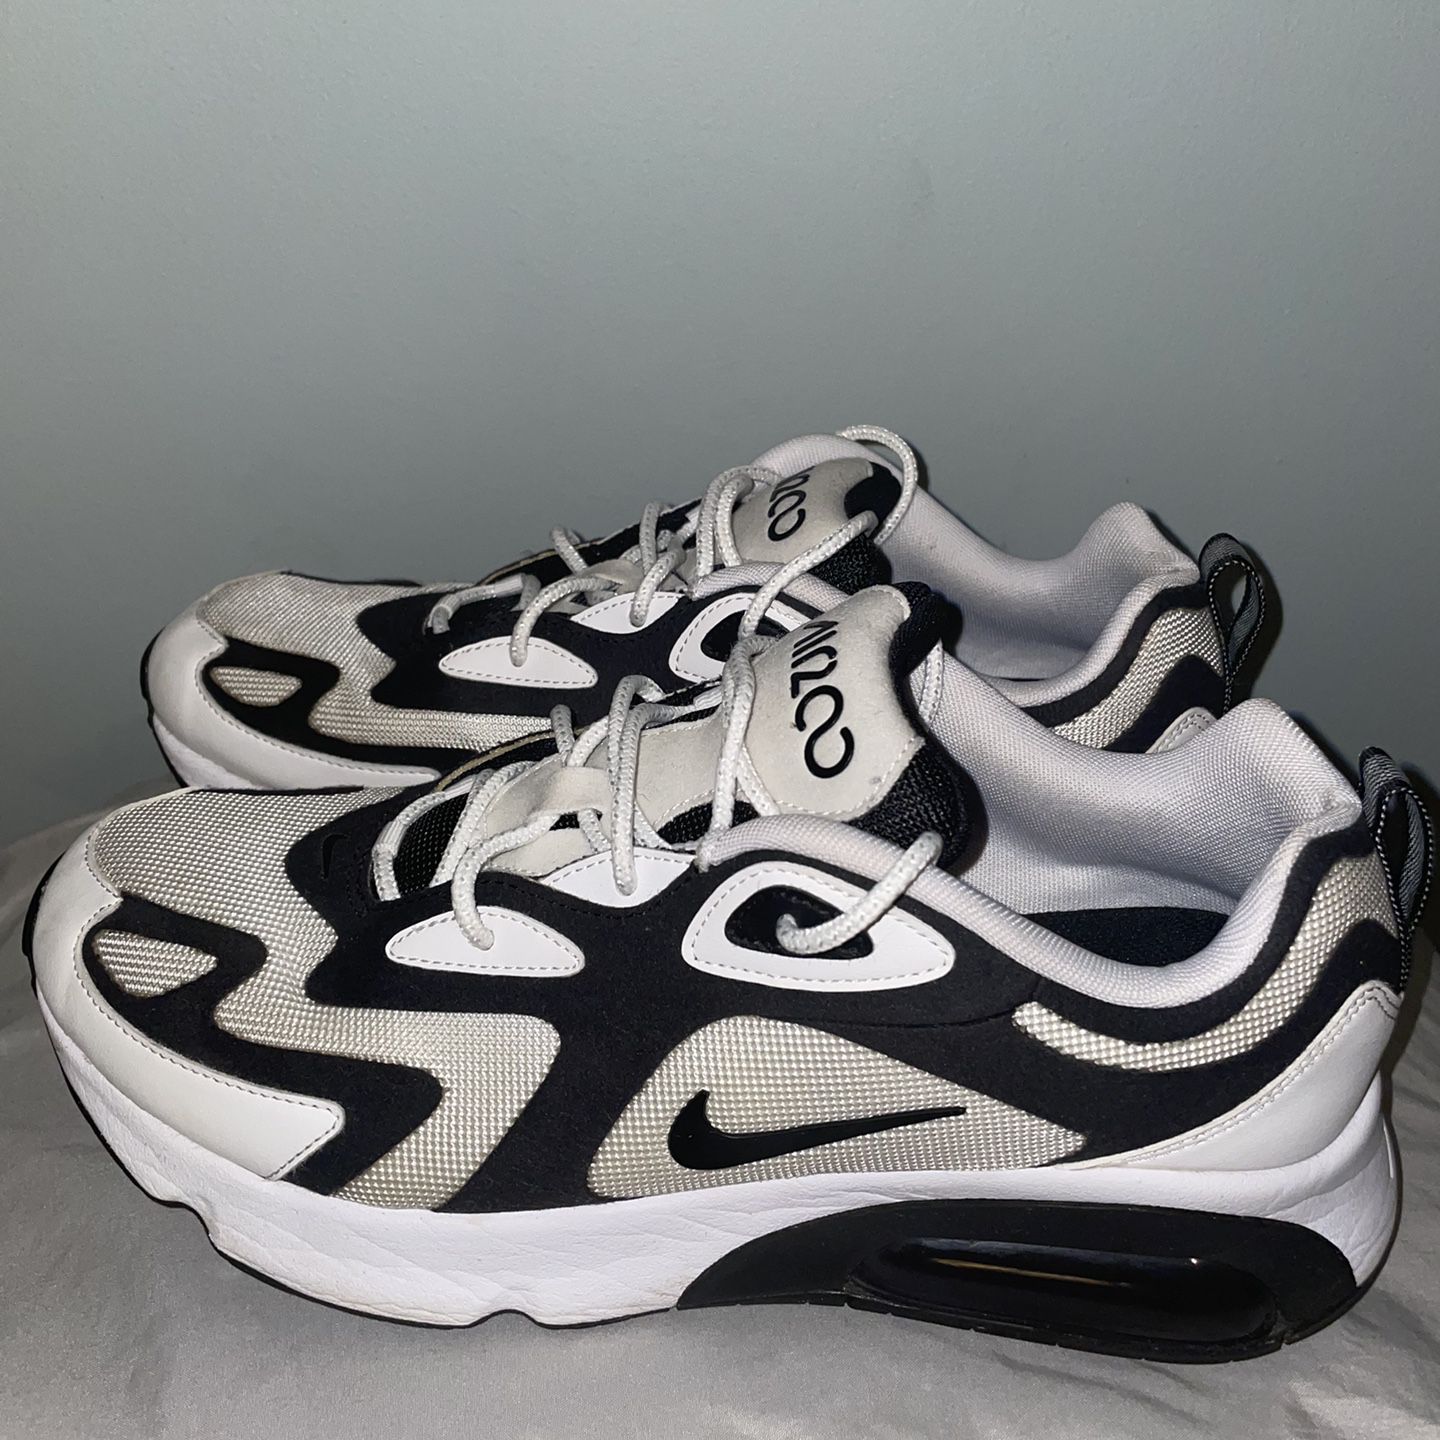 Air Max 200 Black and White Size 11